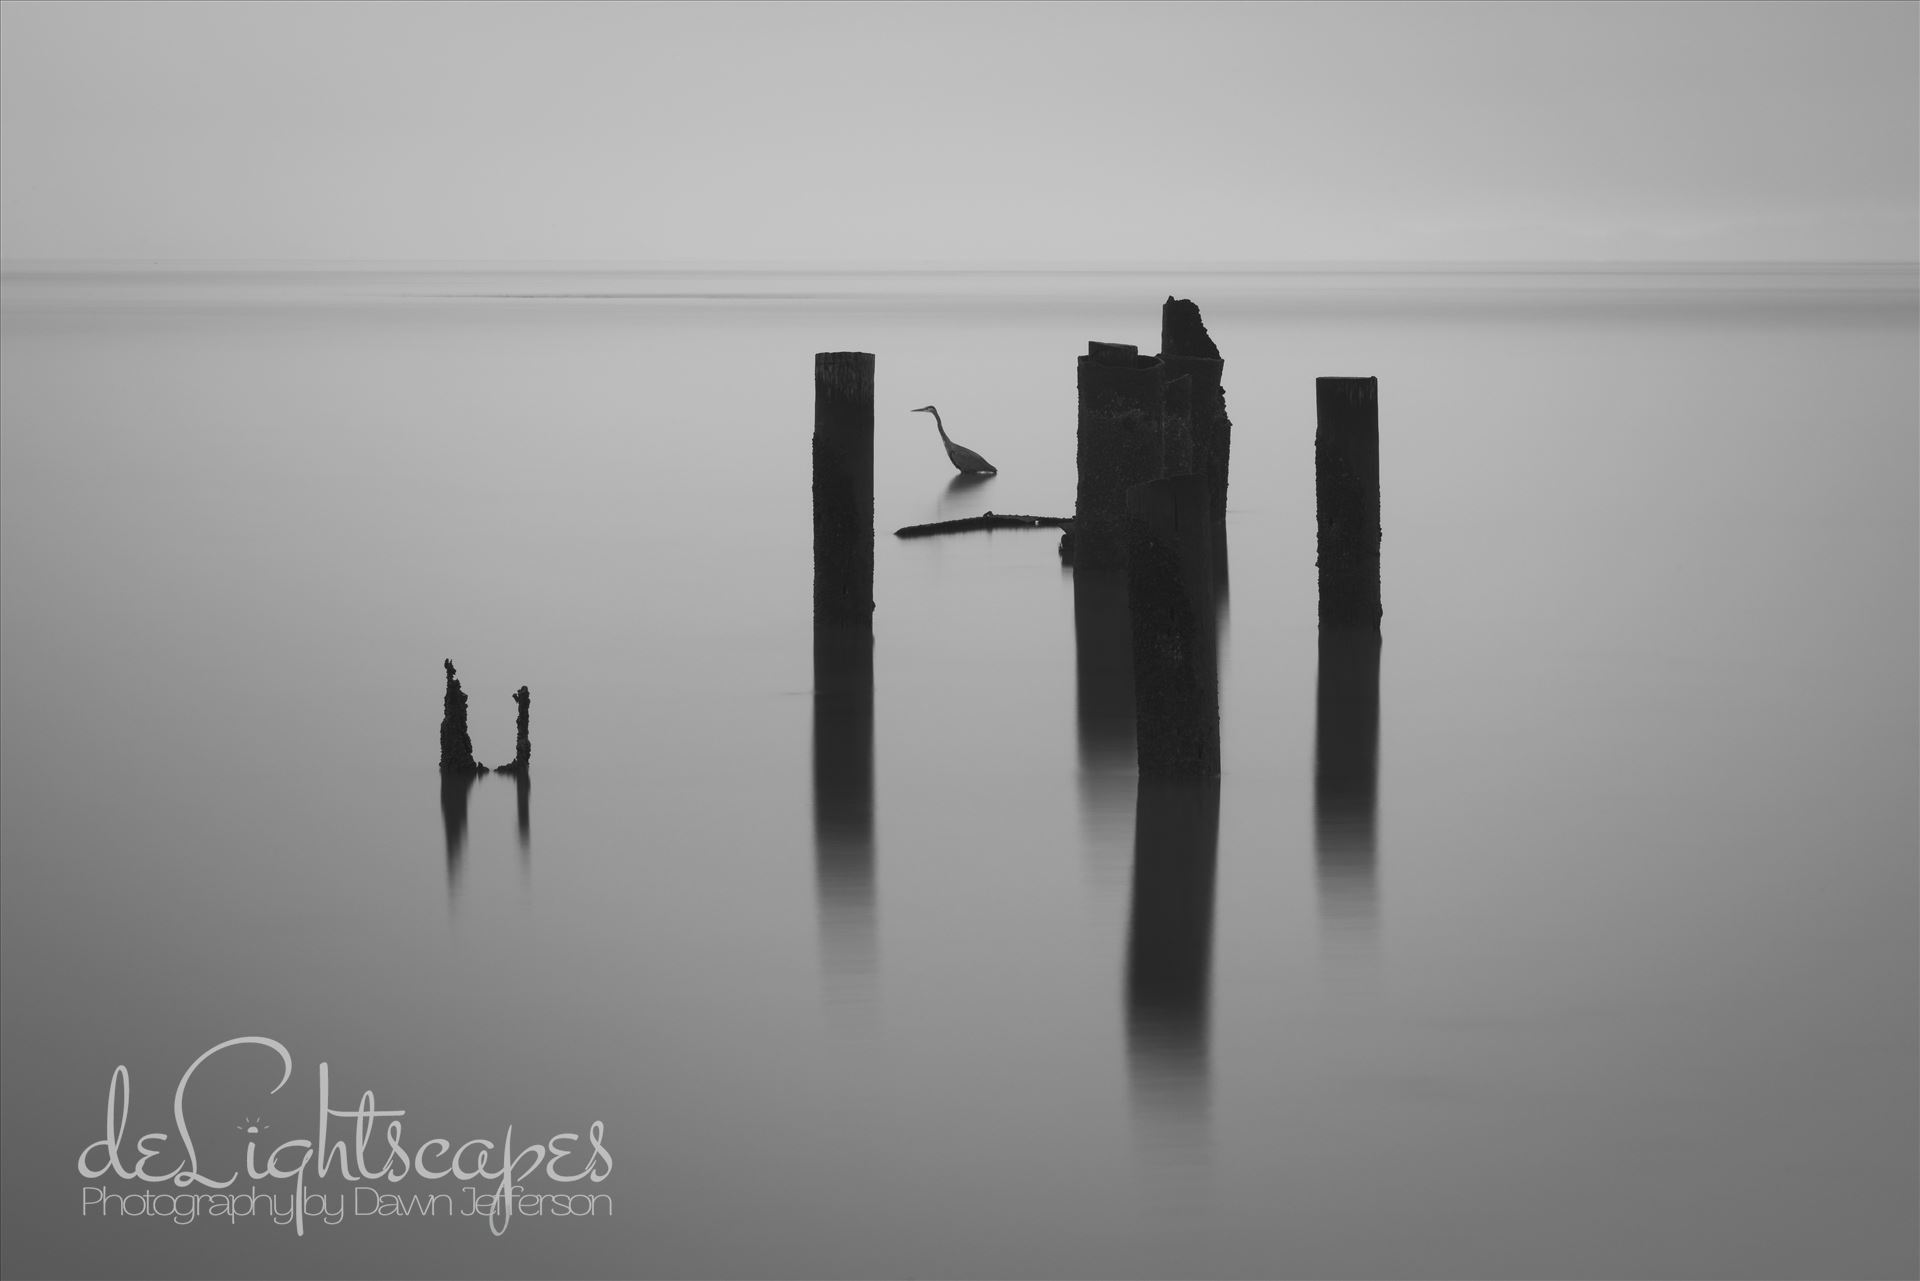 Thirty Seconds of Stillness This is a thirty second exposure in the which the hunting heron stood completely still focused on his fishing. by Dawn Jefferson